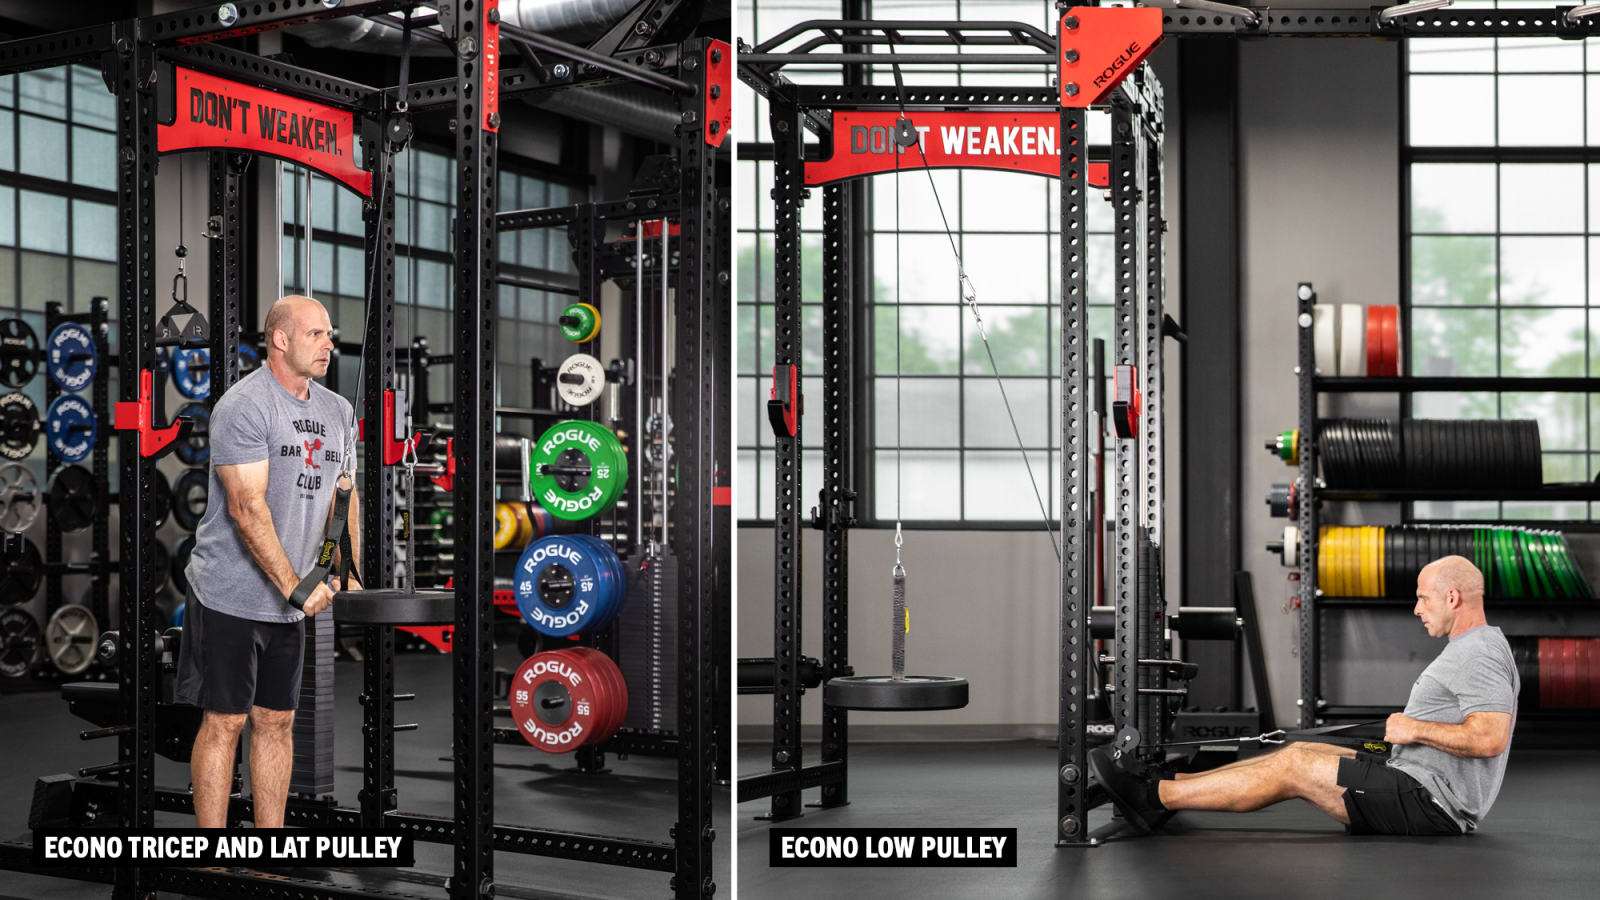 Rogue Individual Pullup System - Bodyweight Training - CrossFit